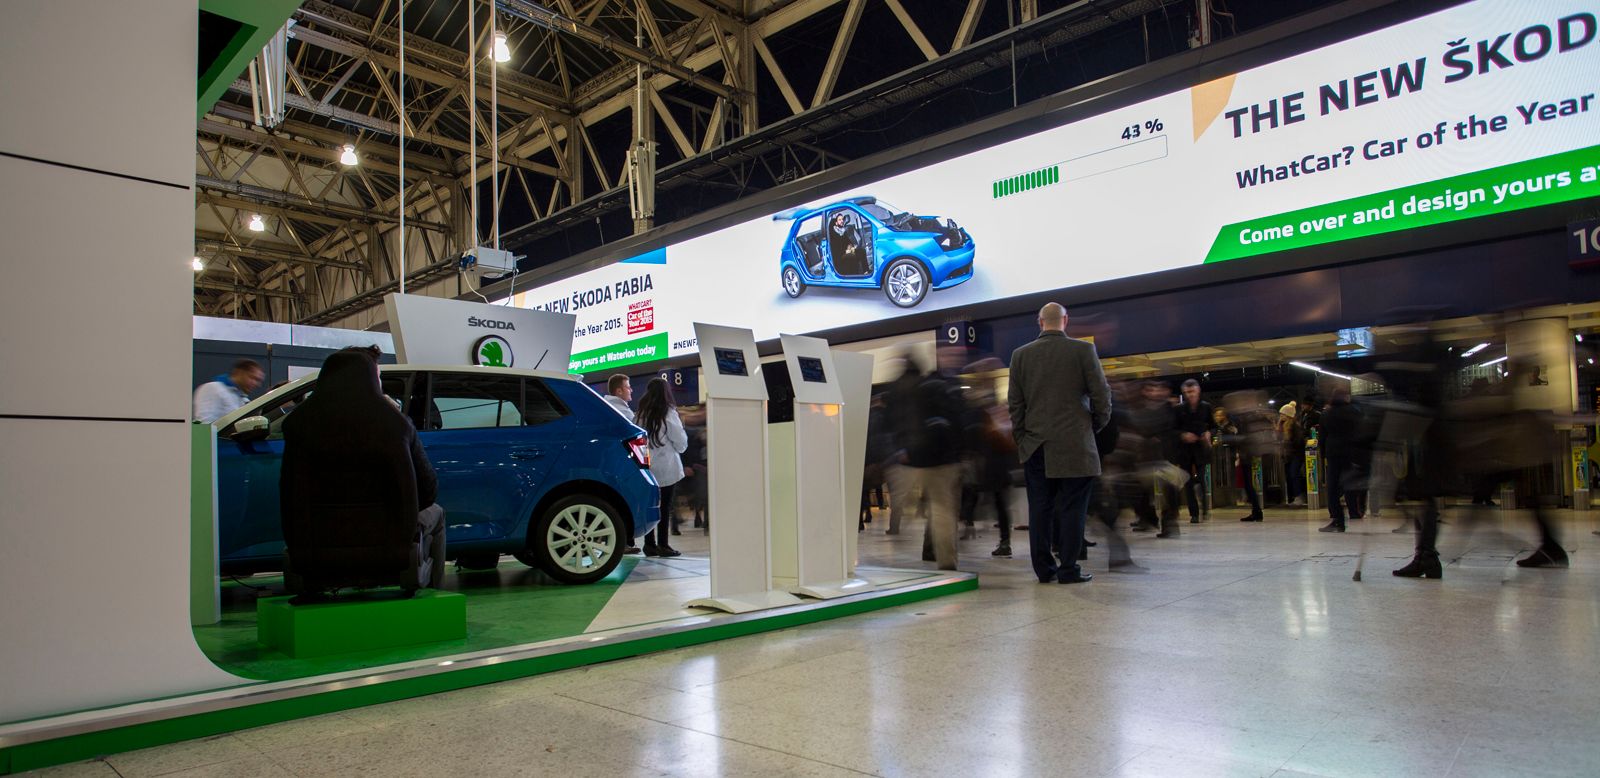 skoda uses augmented reailty to let you design and try on a new fabia image 1